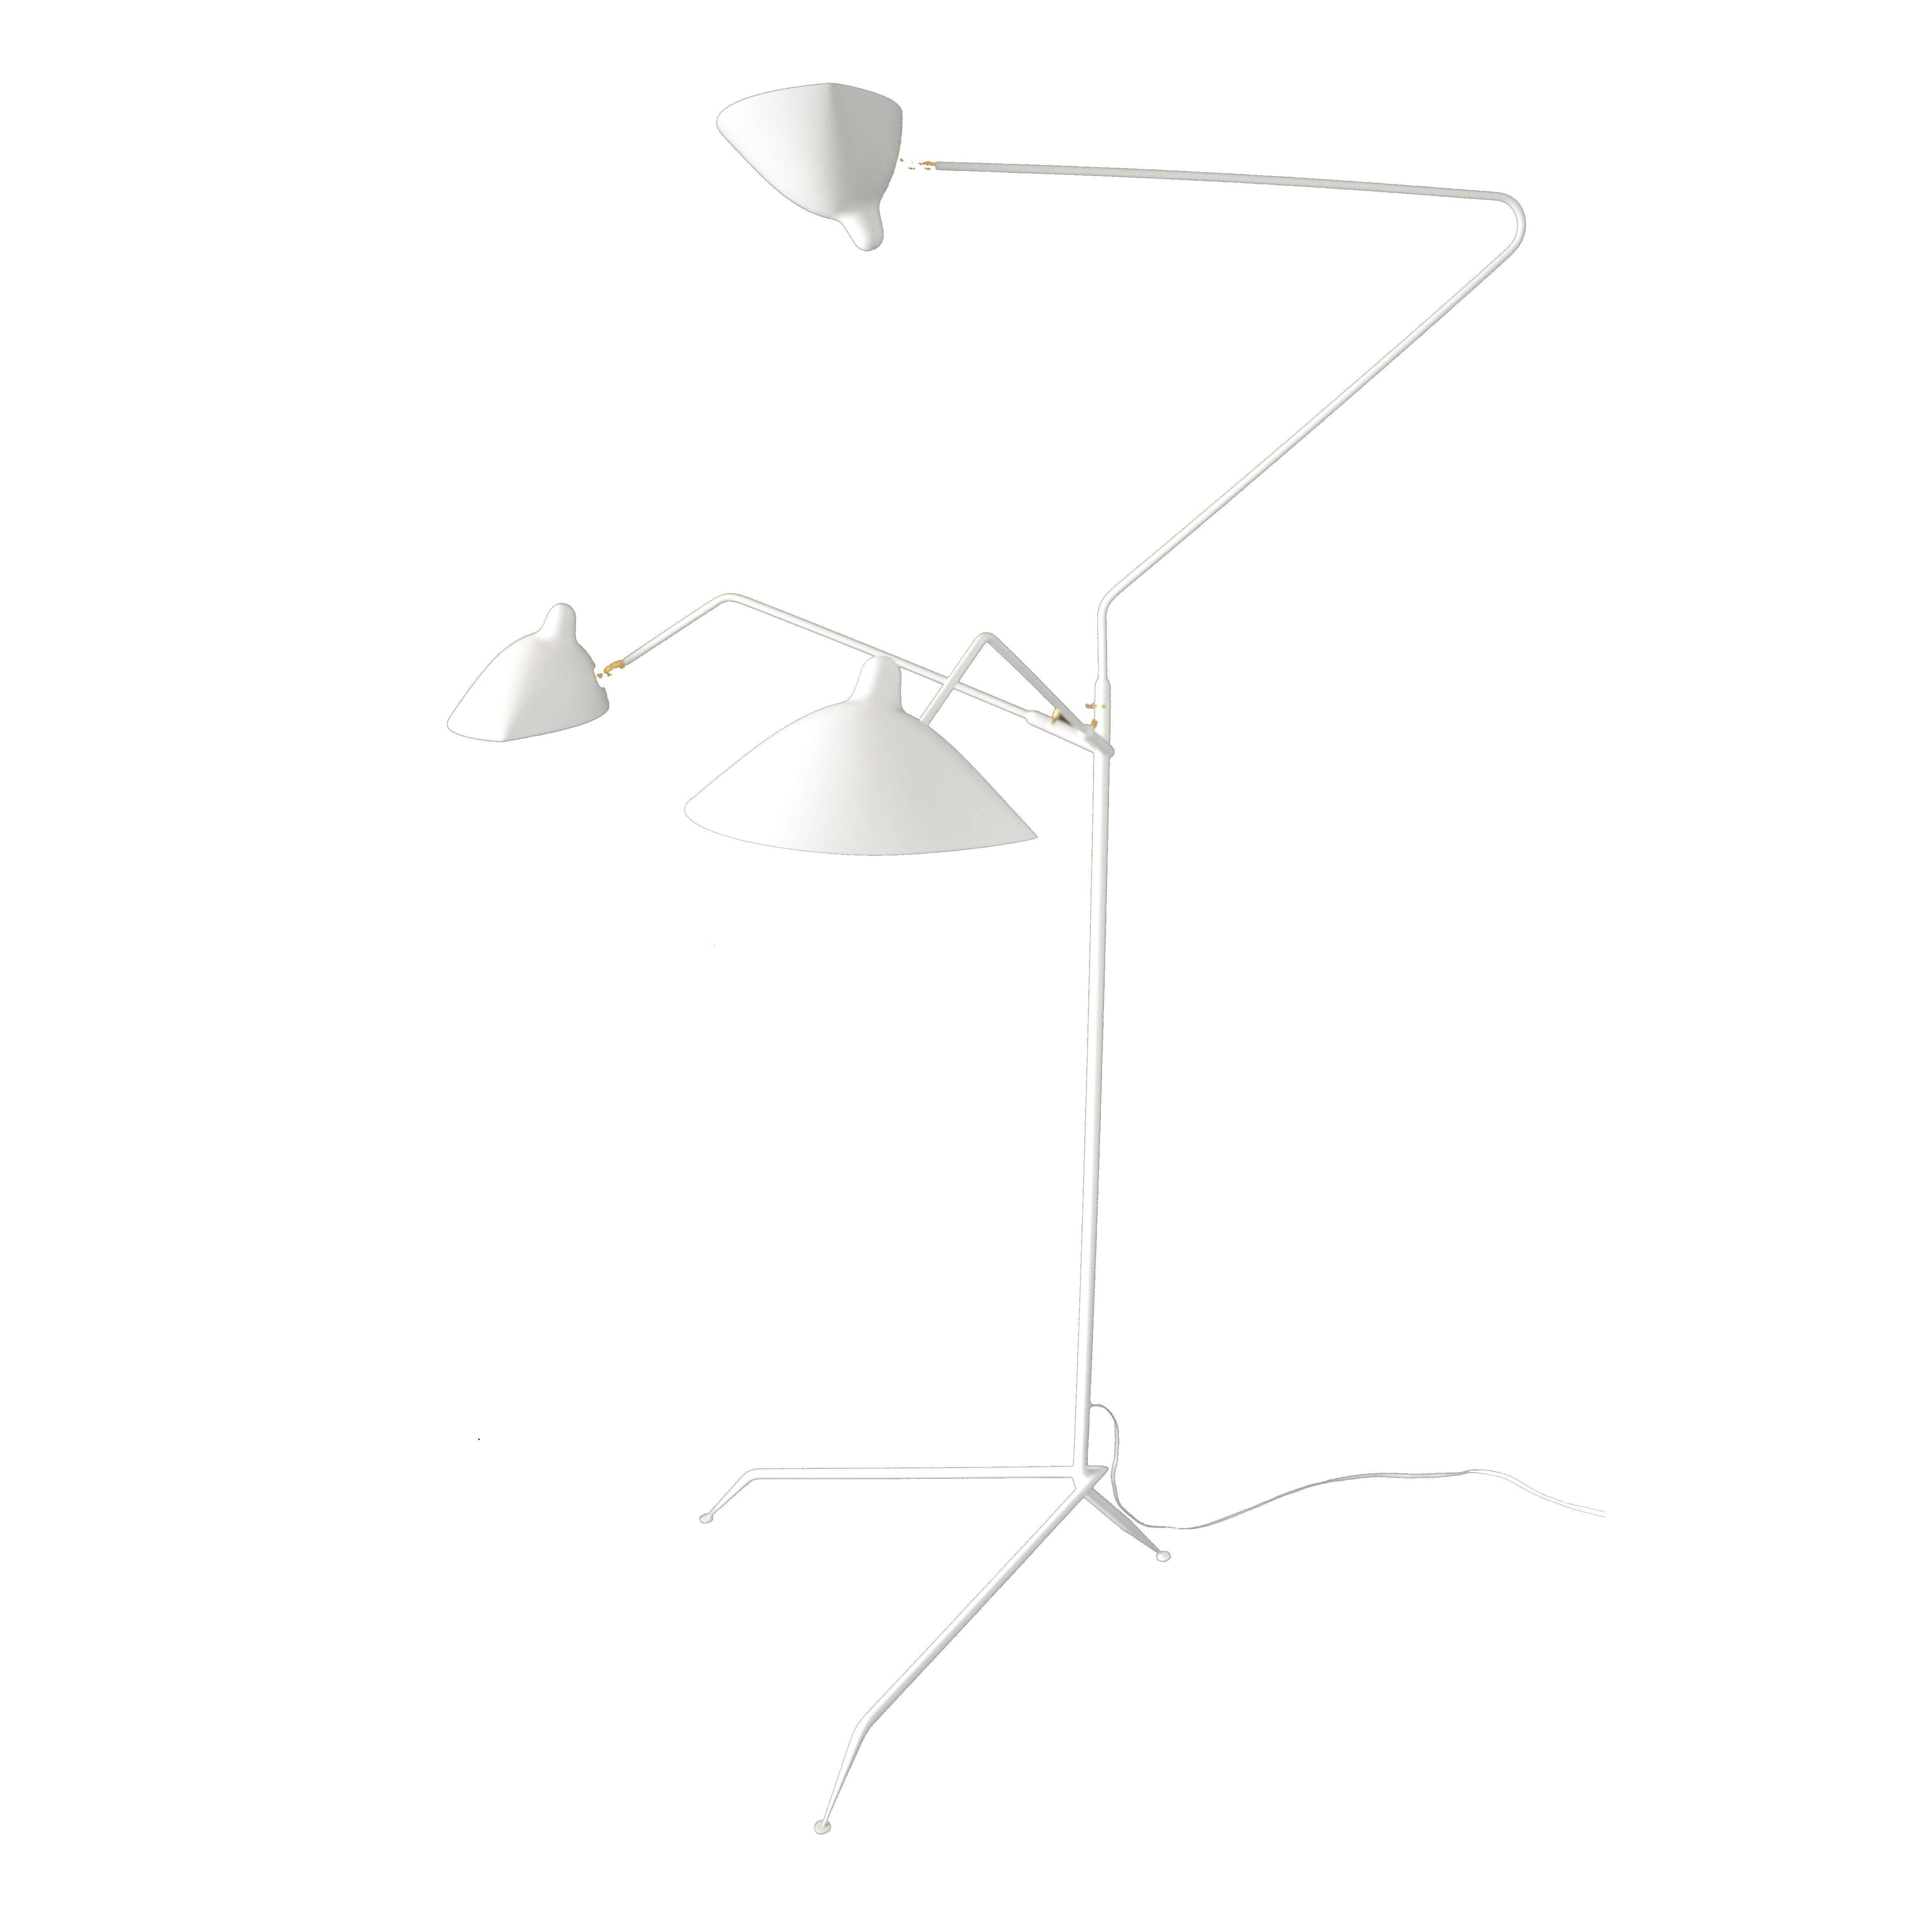 This is the most versatile lamp of the Mouille collection. Each ‘chapeau’ shade can be oriented differently. Sculptural in form with three rotating arms, it stands majestically on a tripod base ending with tapered legs. 

Accent pieces are in